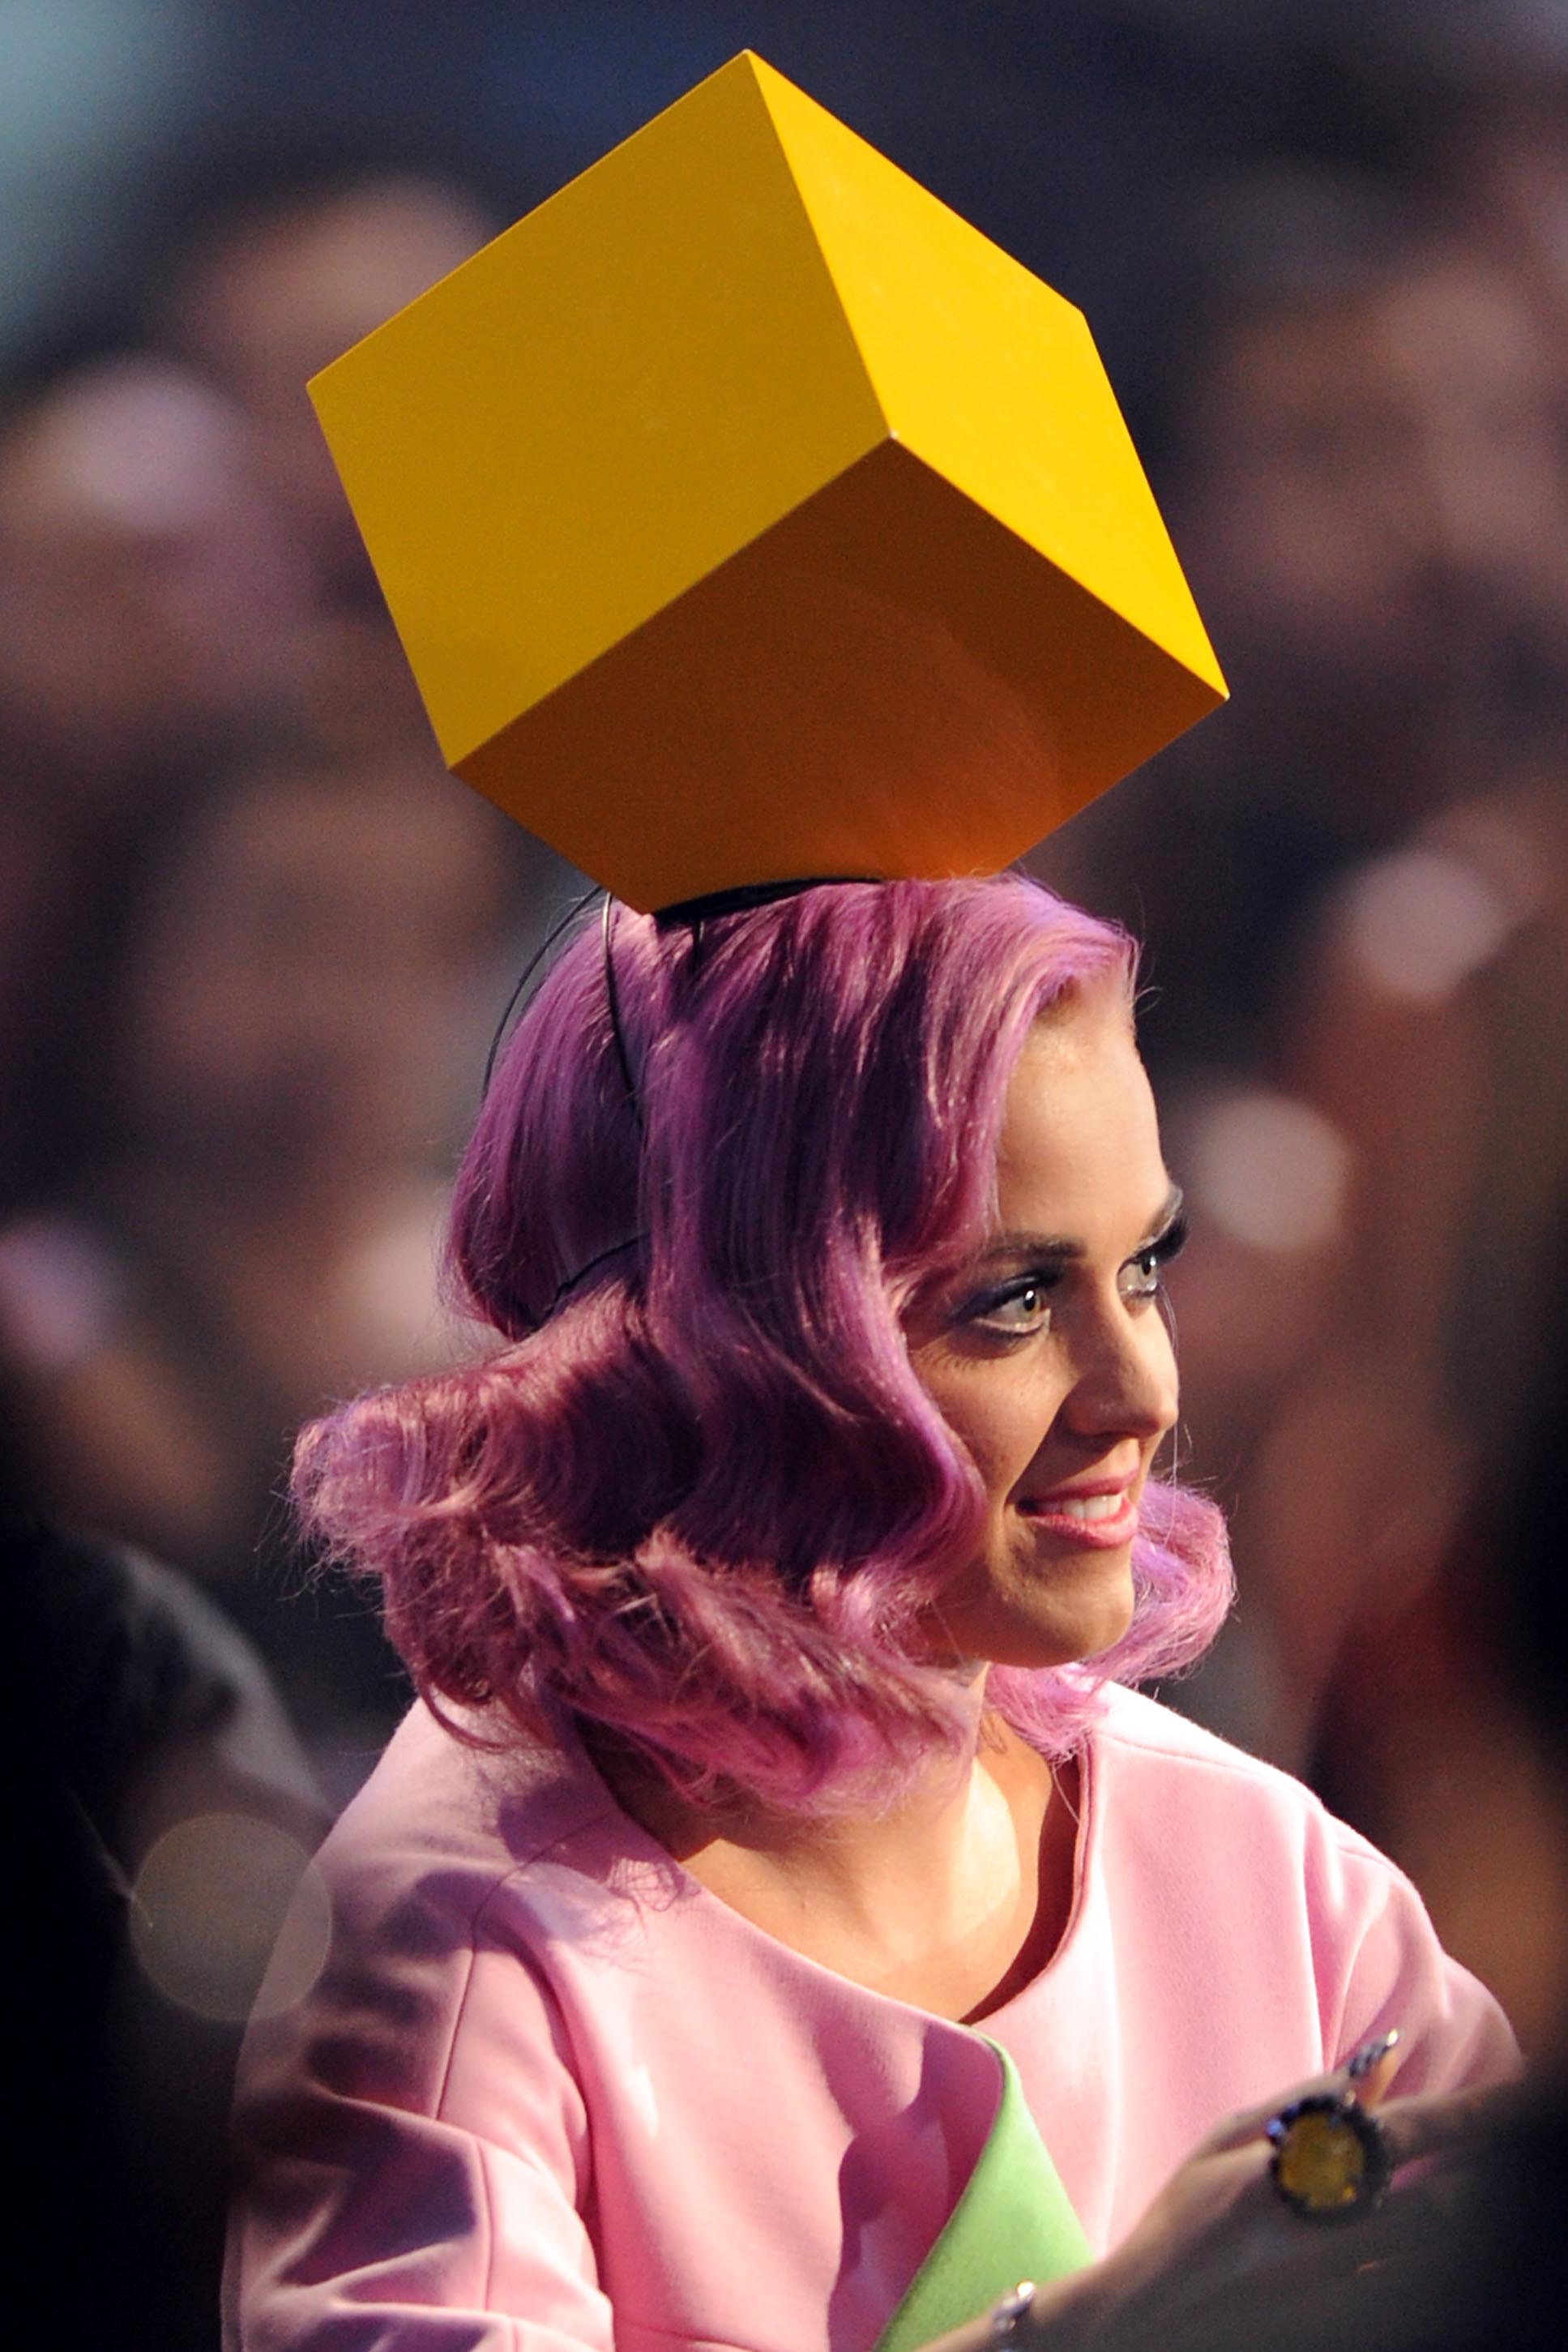 Katy Perry at the 2011 MTV Video Music Awards in LA on 28th August 2011